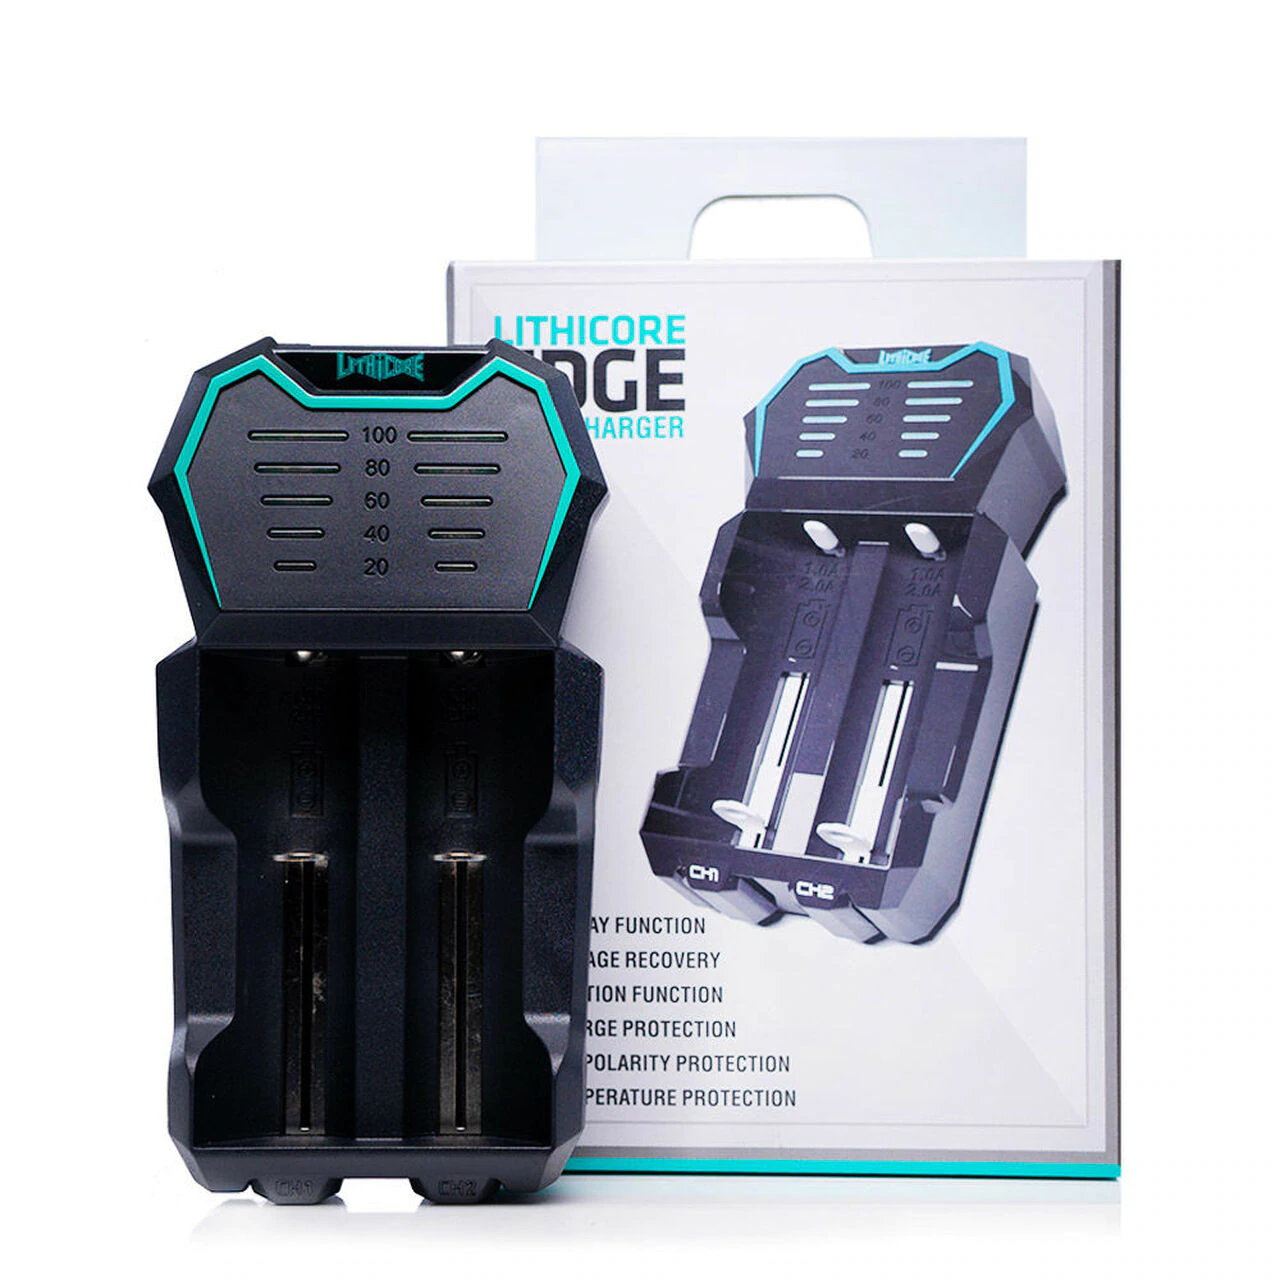 lithicore edge 2 bay charger